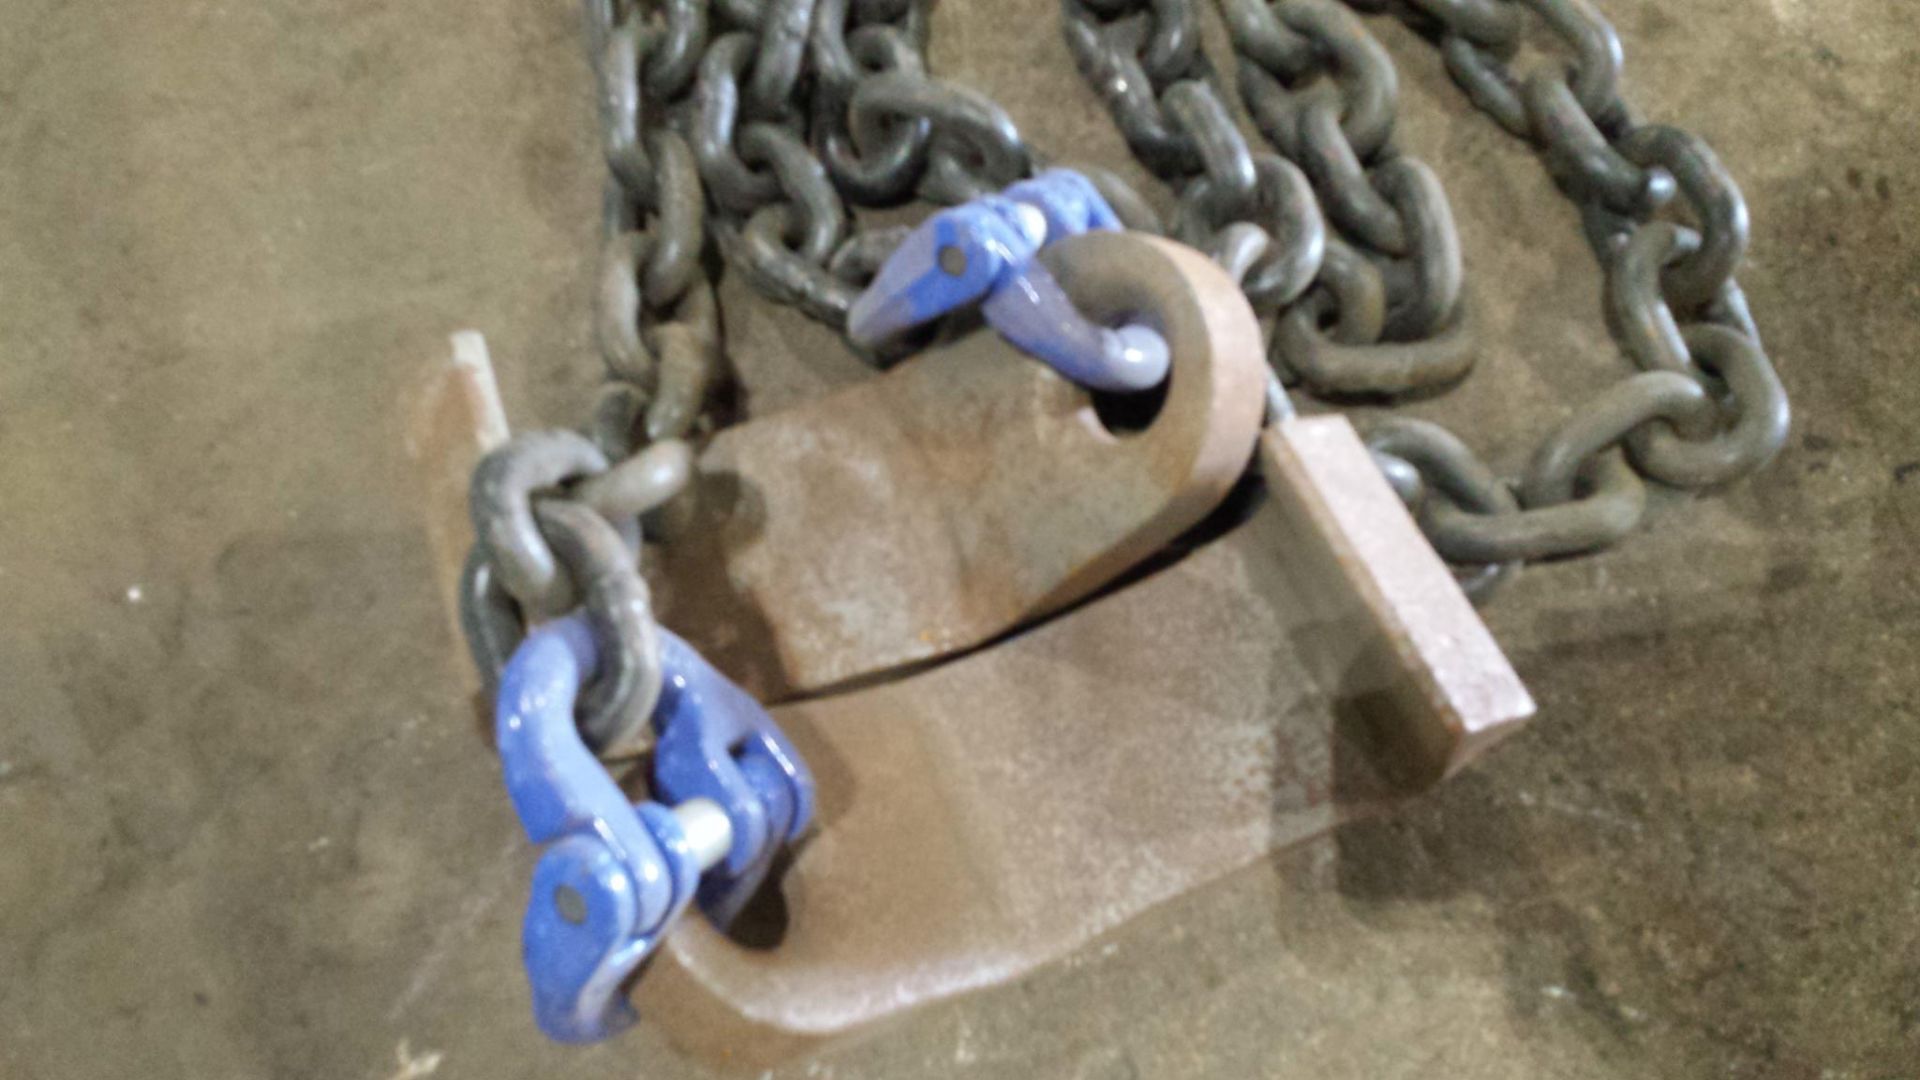 Cartec 11 foot chain and hooks, size 1/2, 26,000 lb capacity, grade 100 - Image 3 of 5